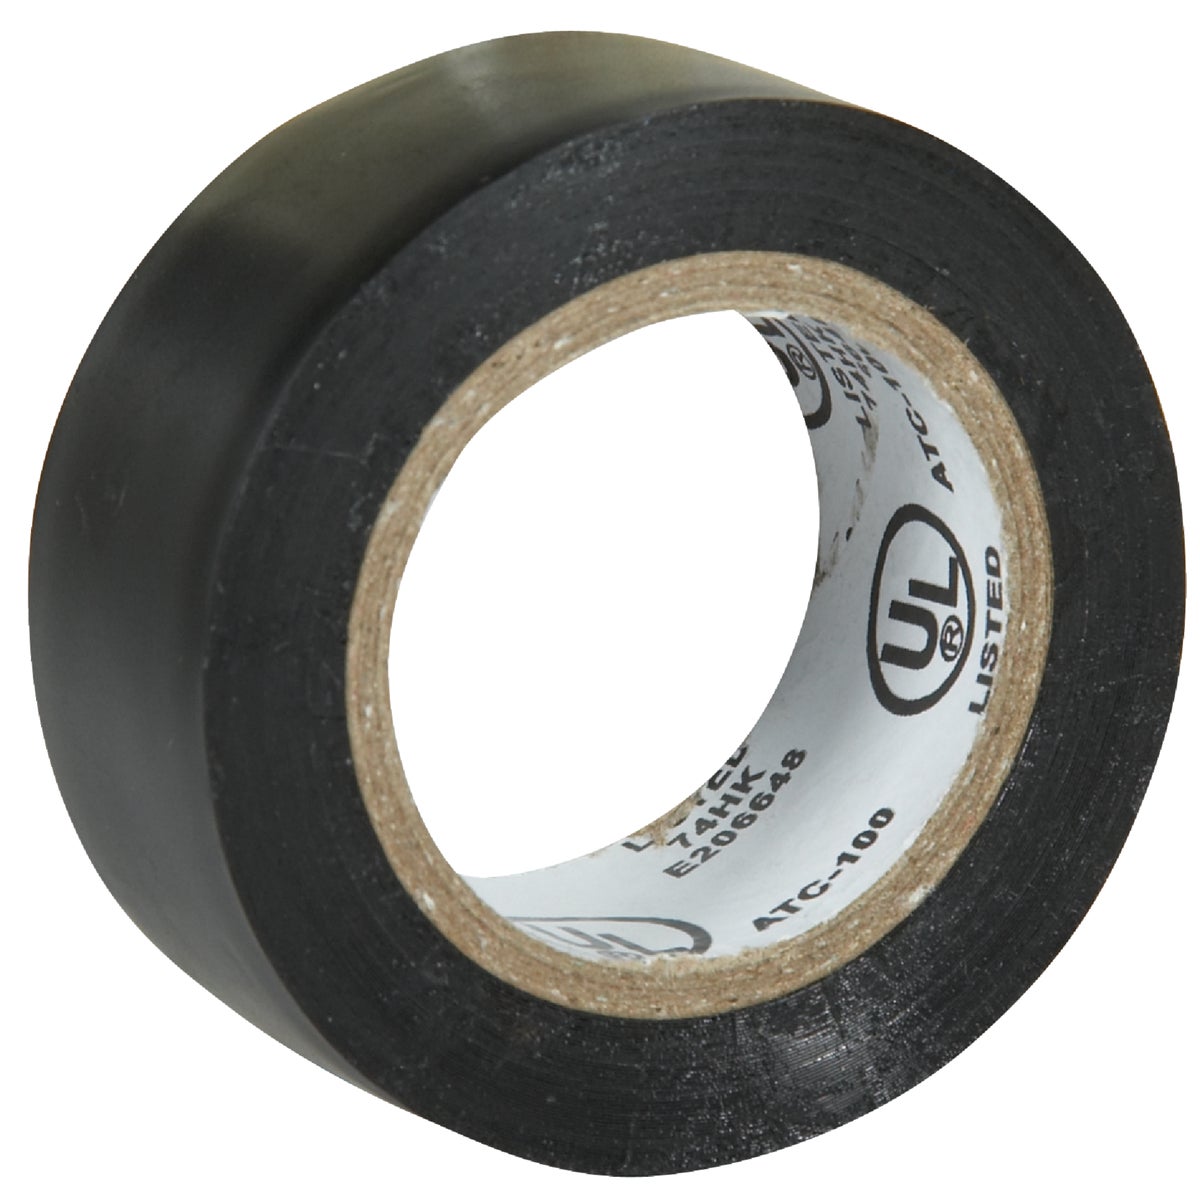 Do it General Purpose 3/4 In. x 20 Ft. Black Electrical Tape